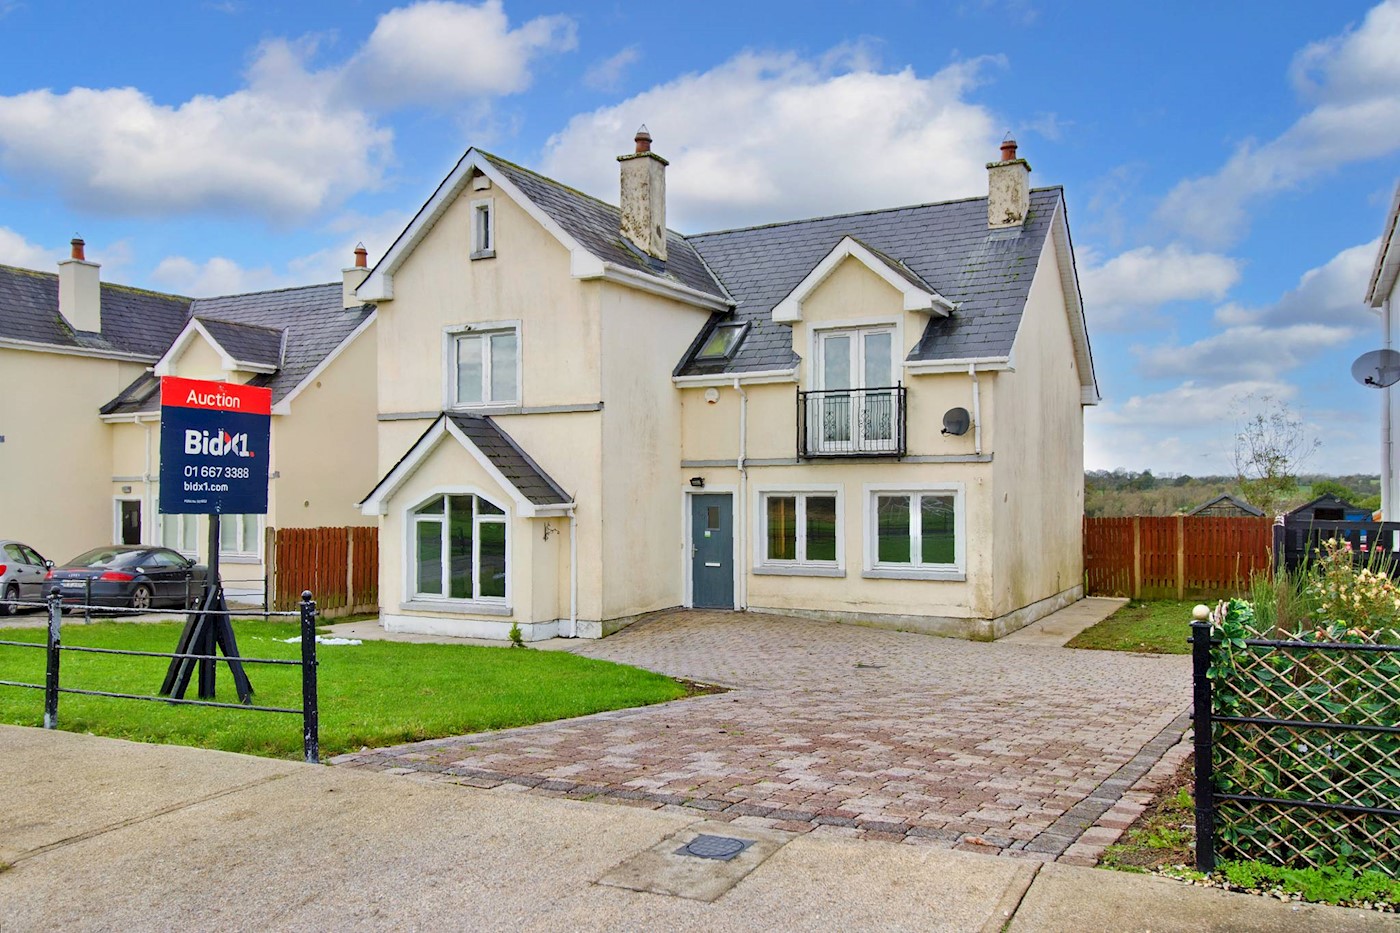 No 50 Ballyoliver, Rathvilly, Co. Carlow, R93 YP93 1/17